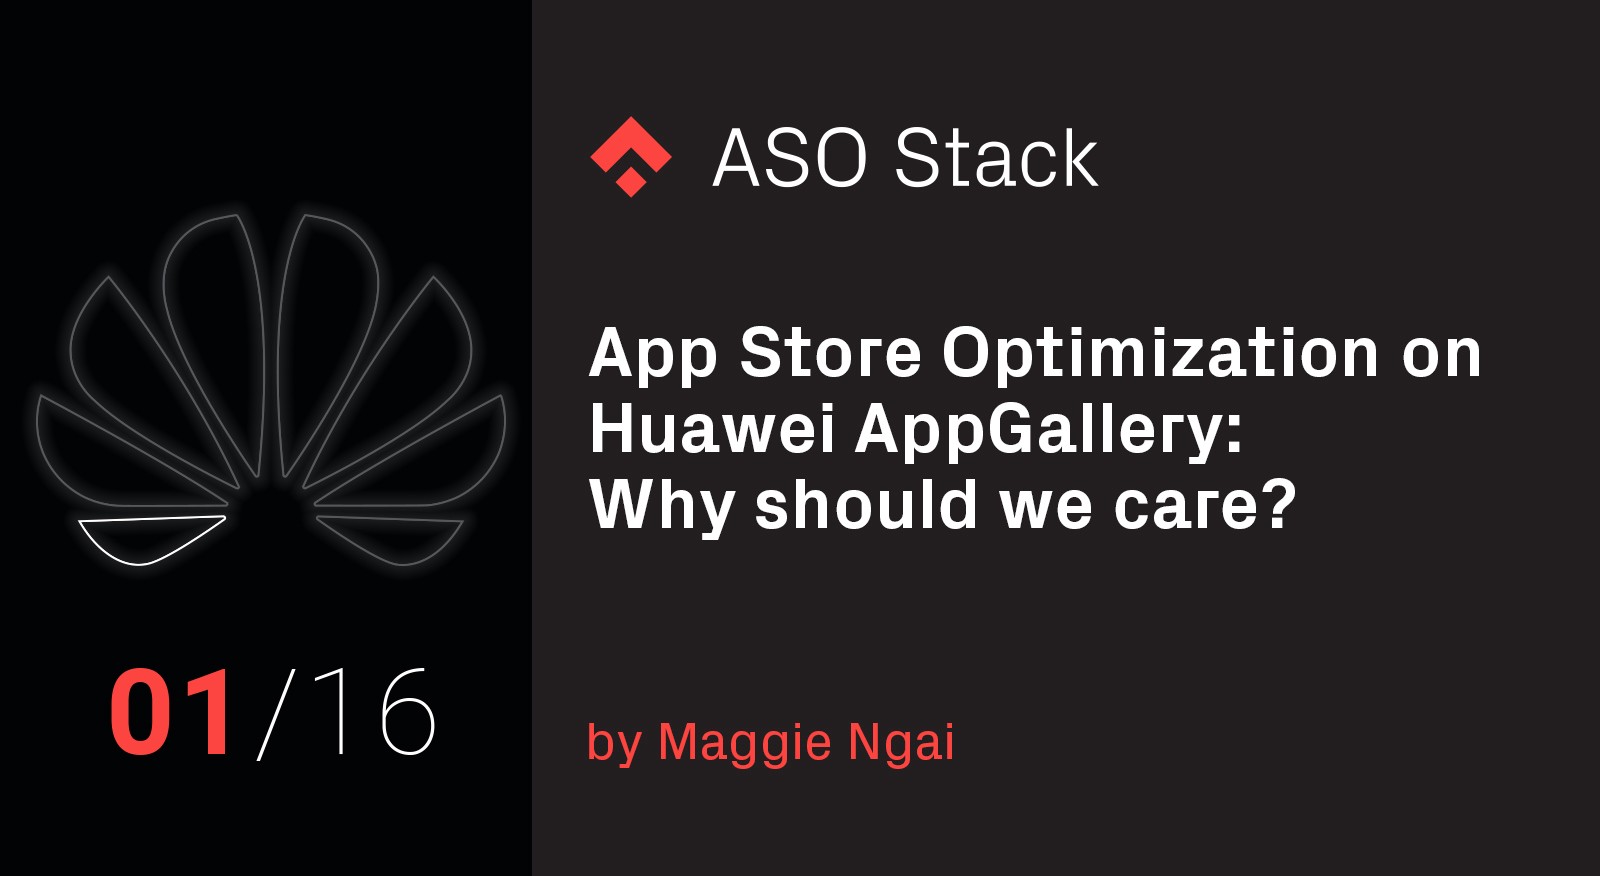 App Store Optimization on Huawei’s AppGallery App Store- Why Should We Care?